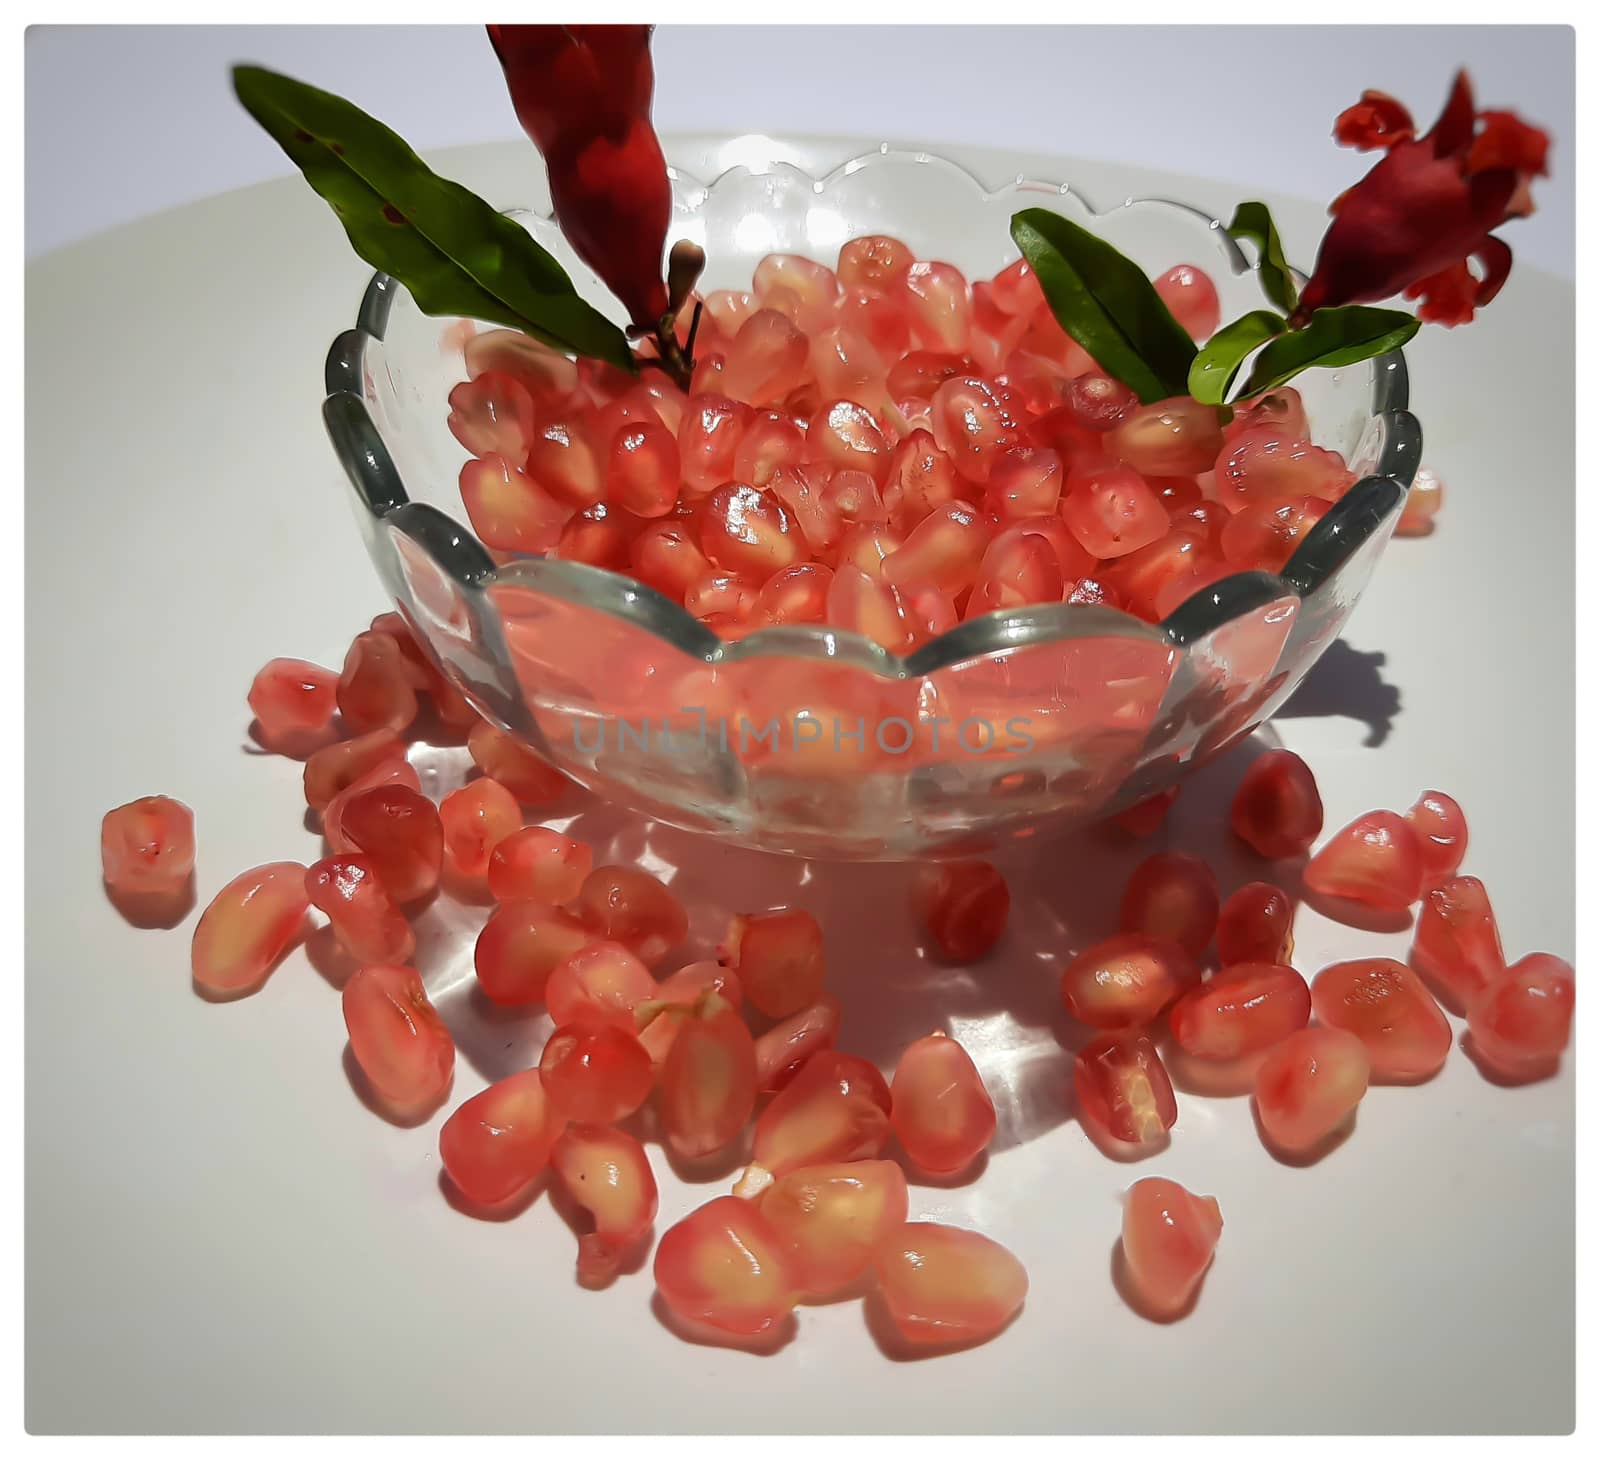 Pomegranate seeds in bowl with shiny red “jewels” inside and its flower buds kept in bowl and placed beautifully in white plate